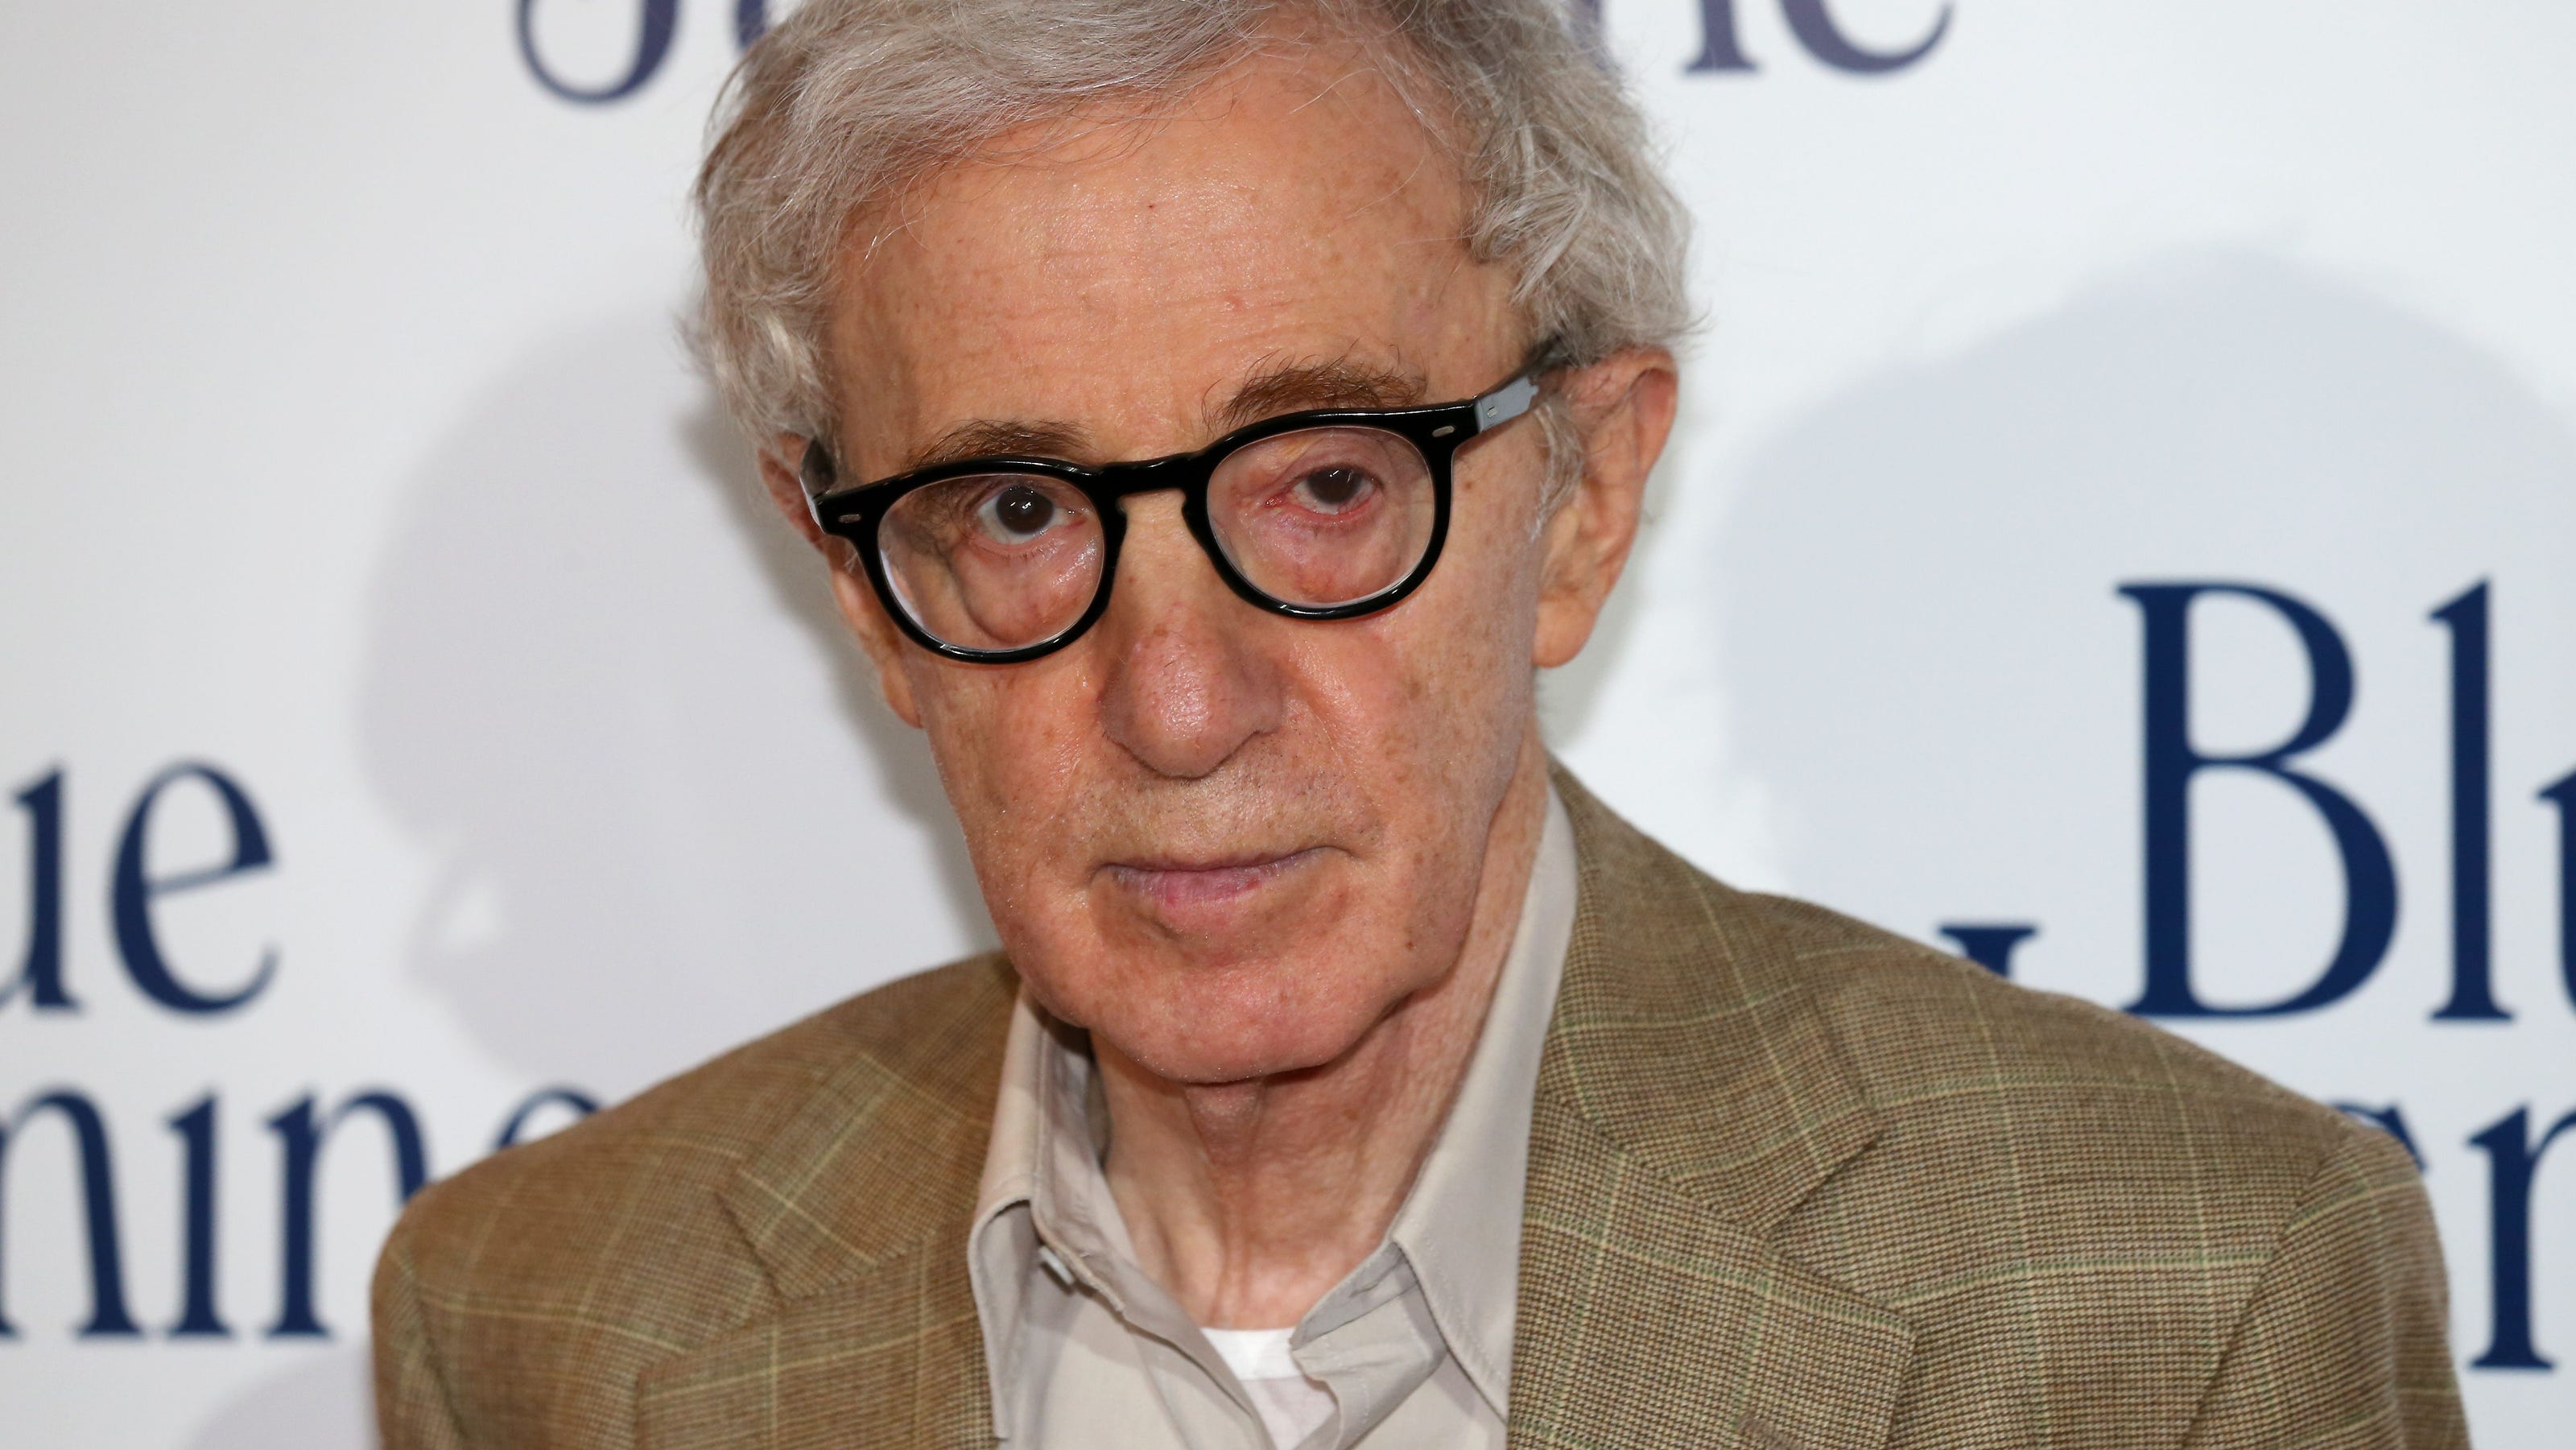 Woody Allen is being tried in the court of public opinion but cancel culture has its flaws - USA TODAY